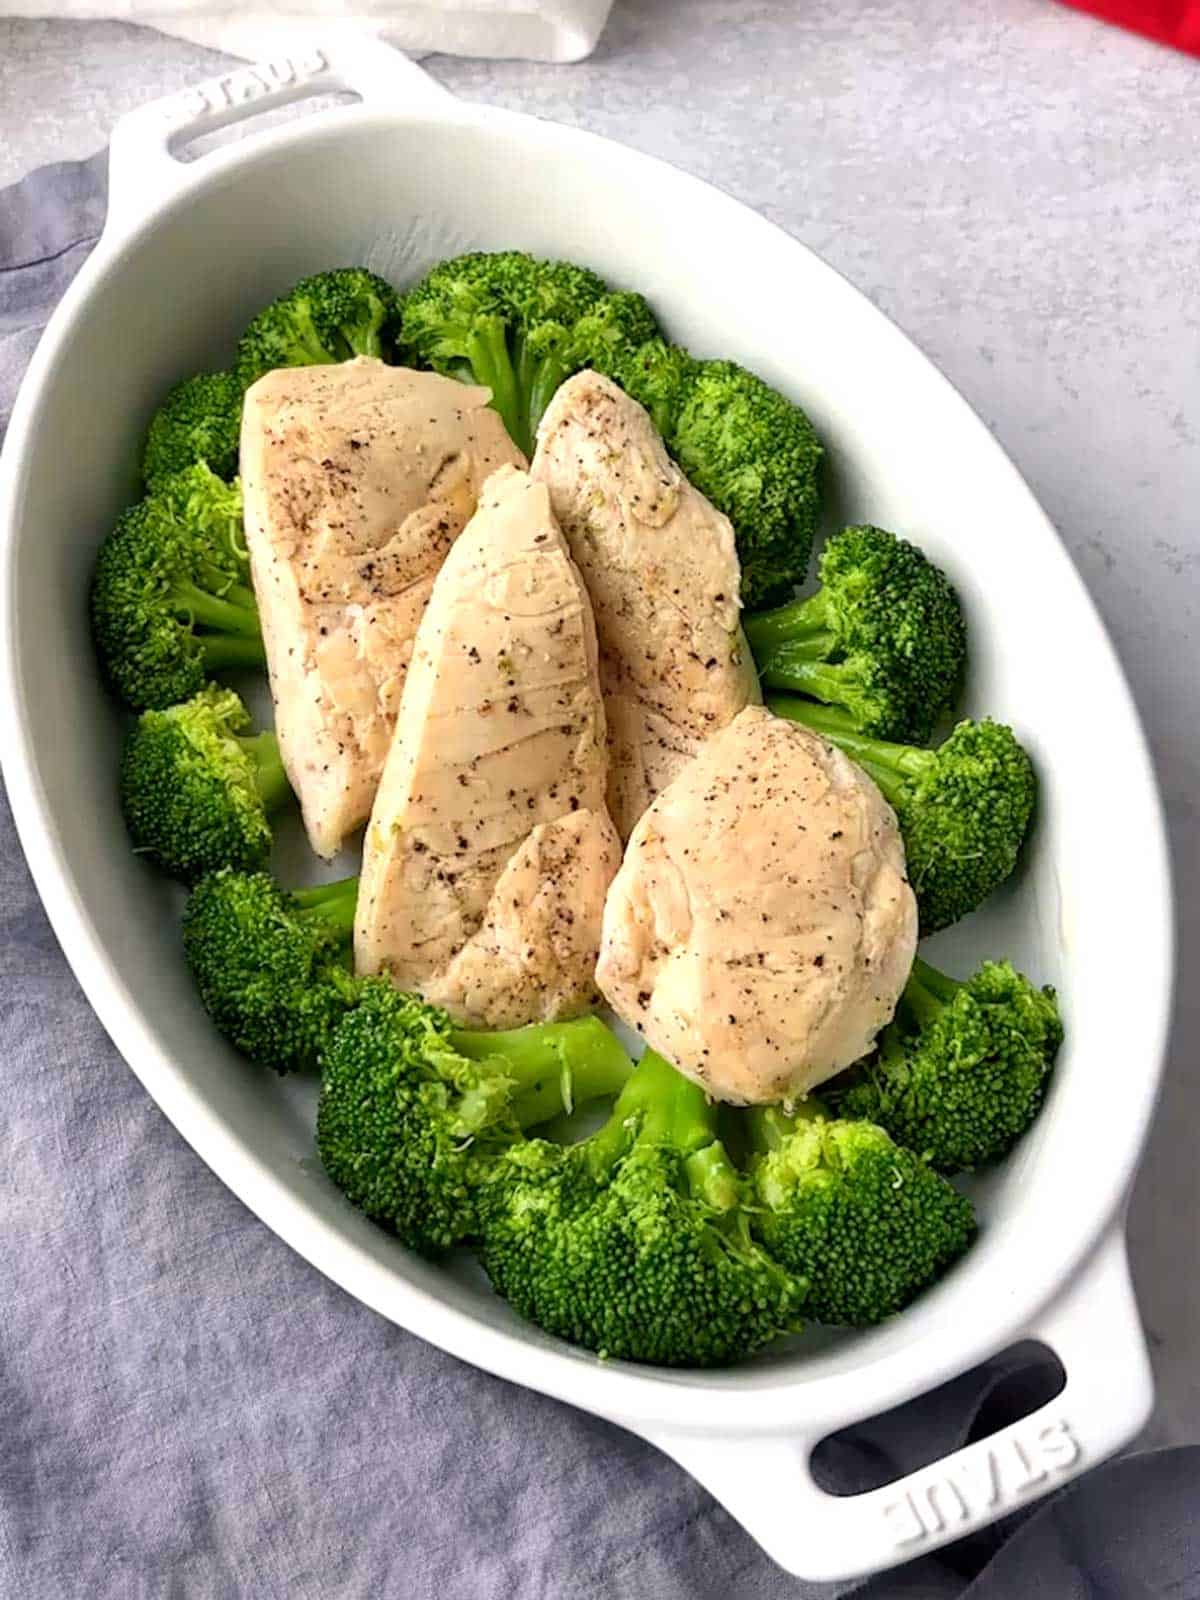 Chicken added to the broccoli in the casserole dish.